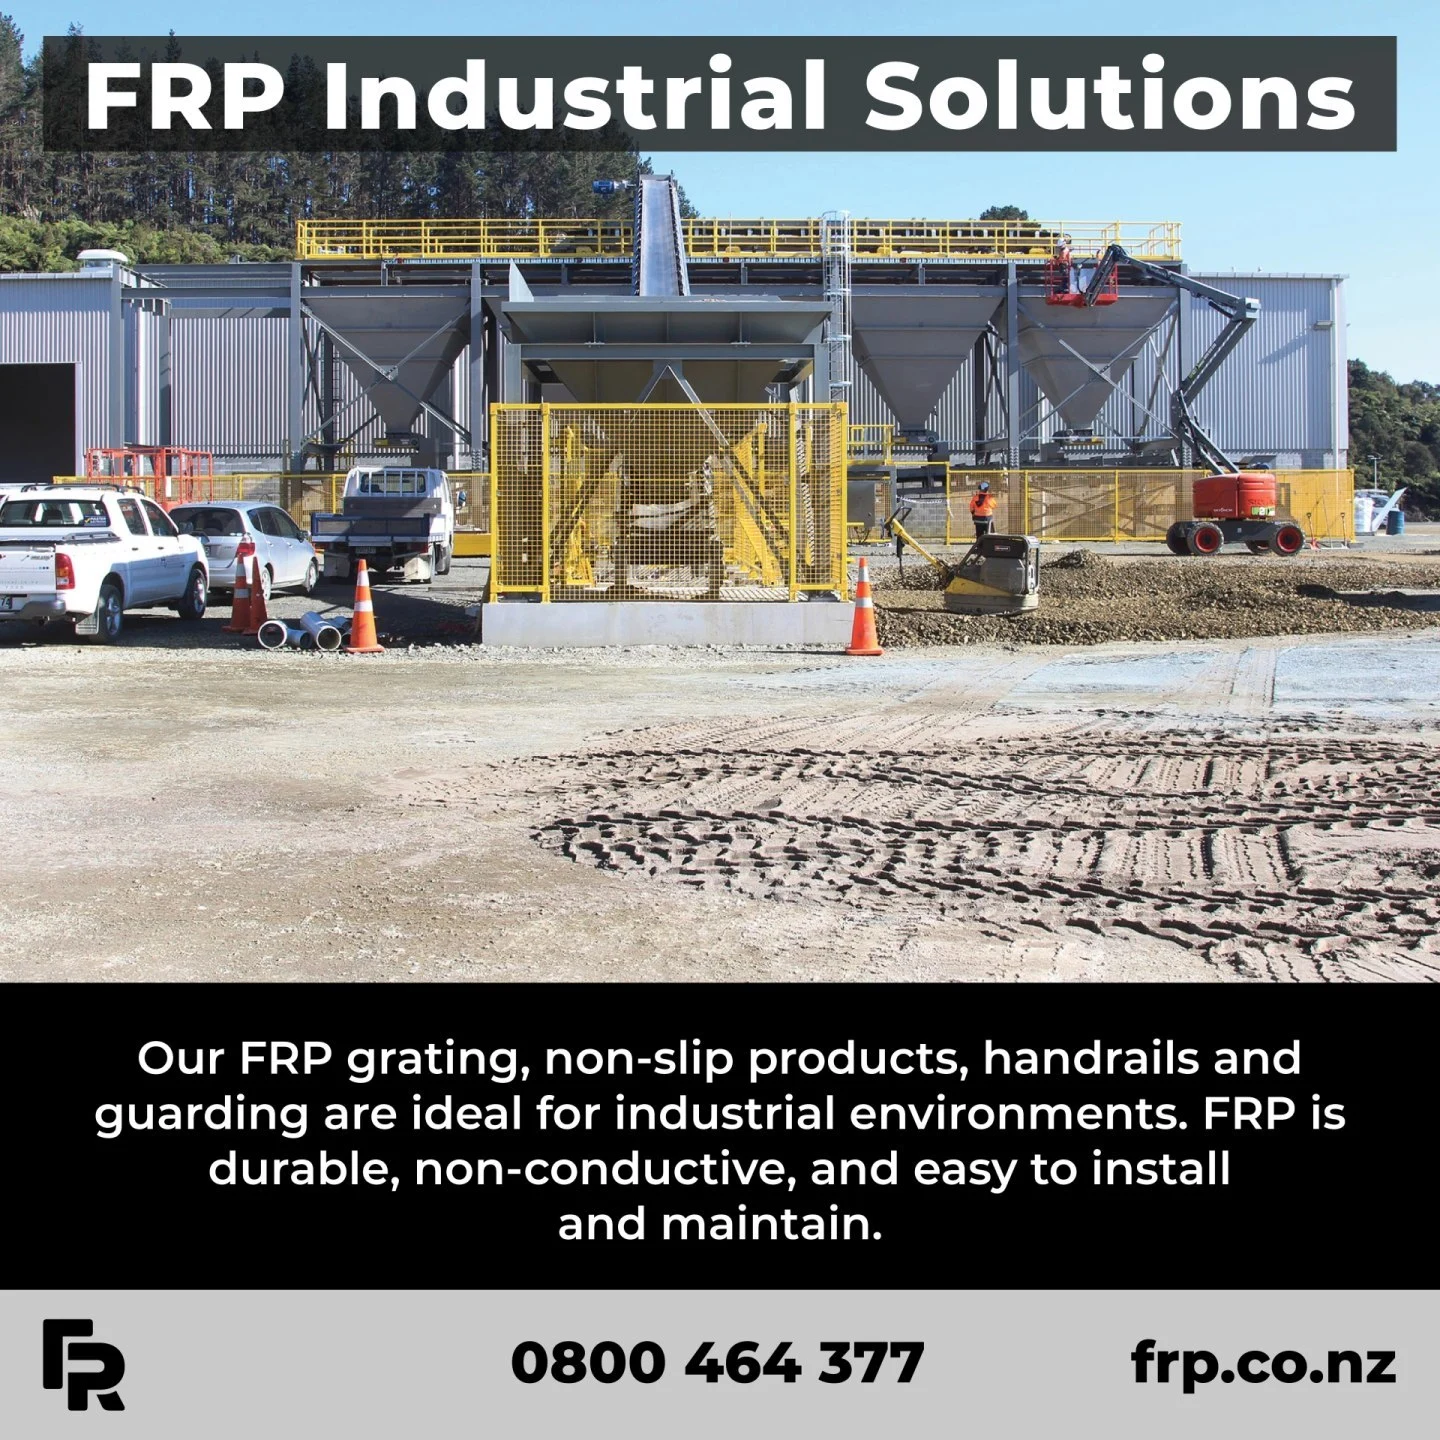 Enquire today!

#frp #frpproducts #industrial #commercial #machinery #engineering #nzconstruction #nzarchitects